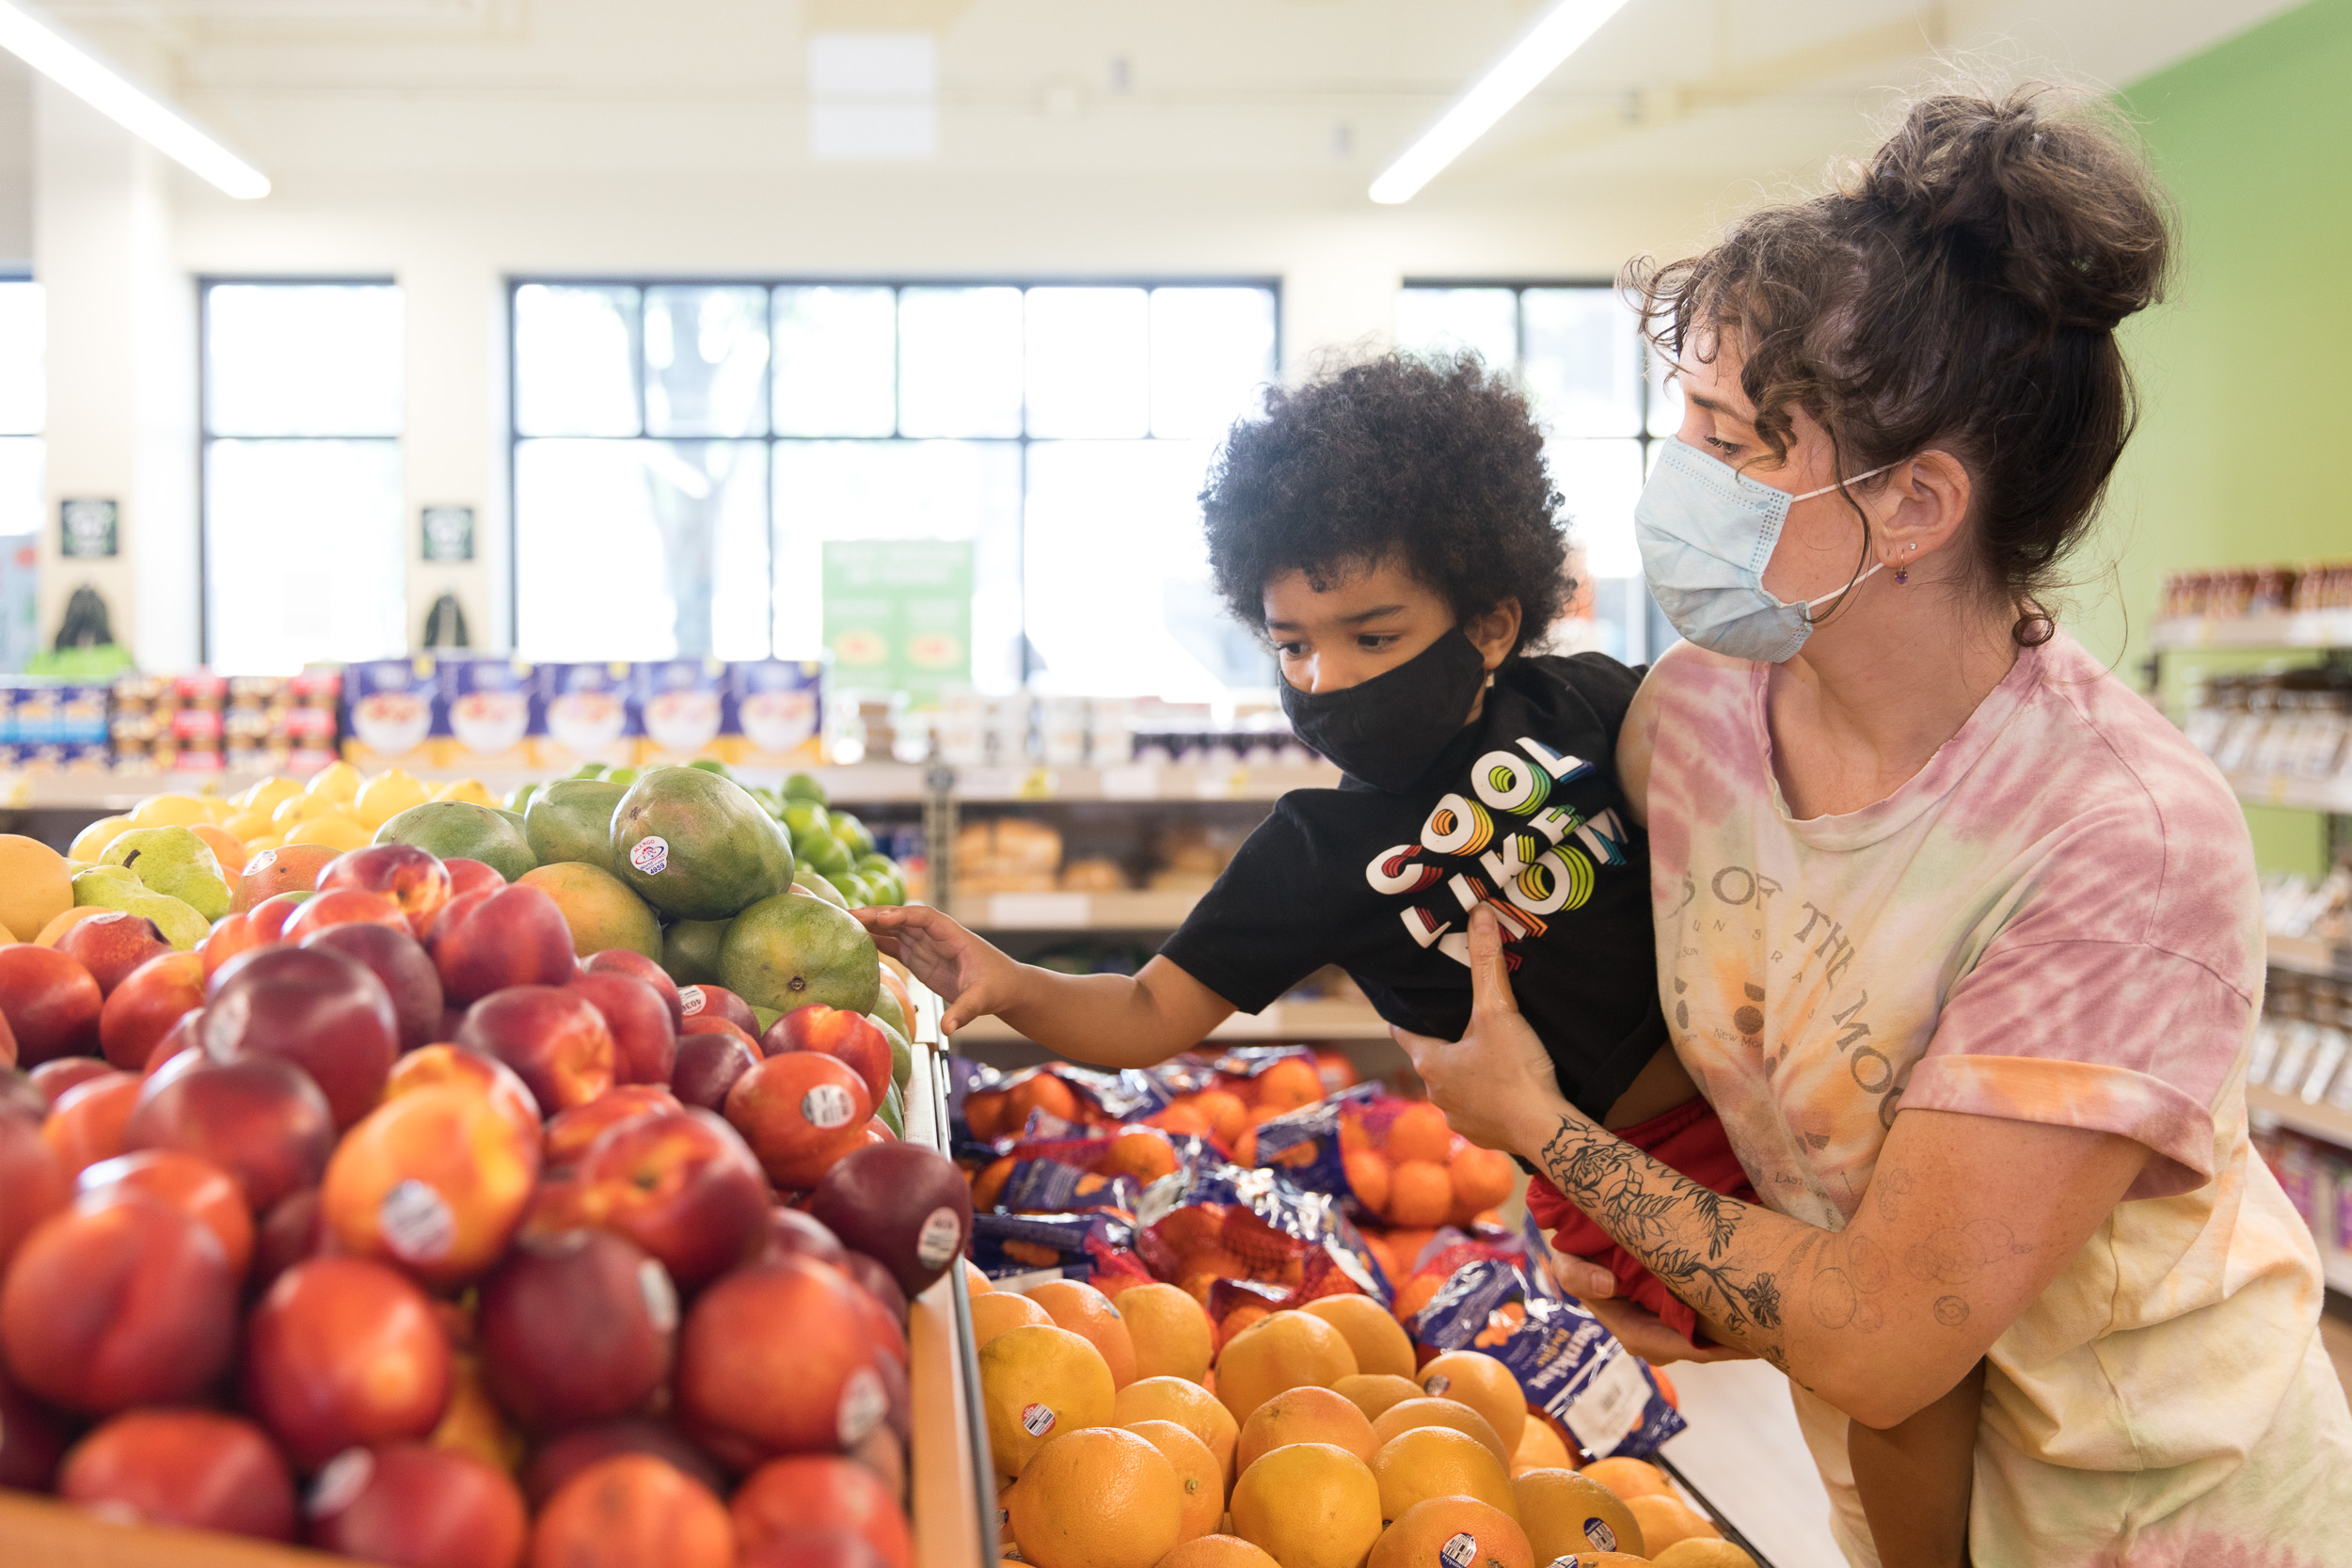 A woman wearing a face mask is holding a young boy who is selecting a mango from a grocery shelf